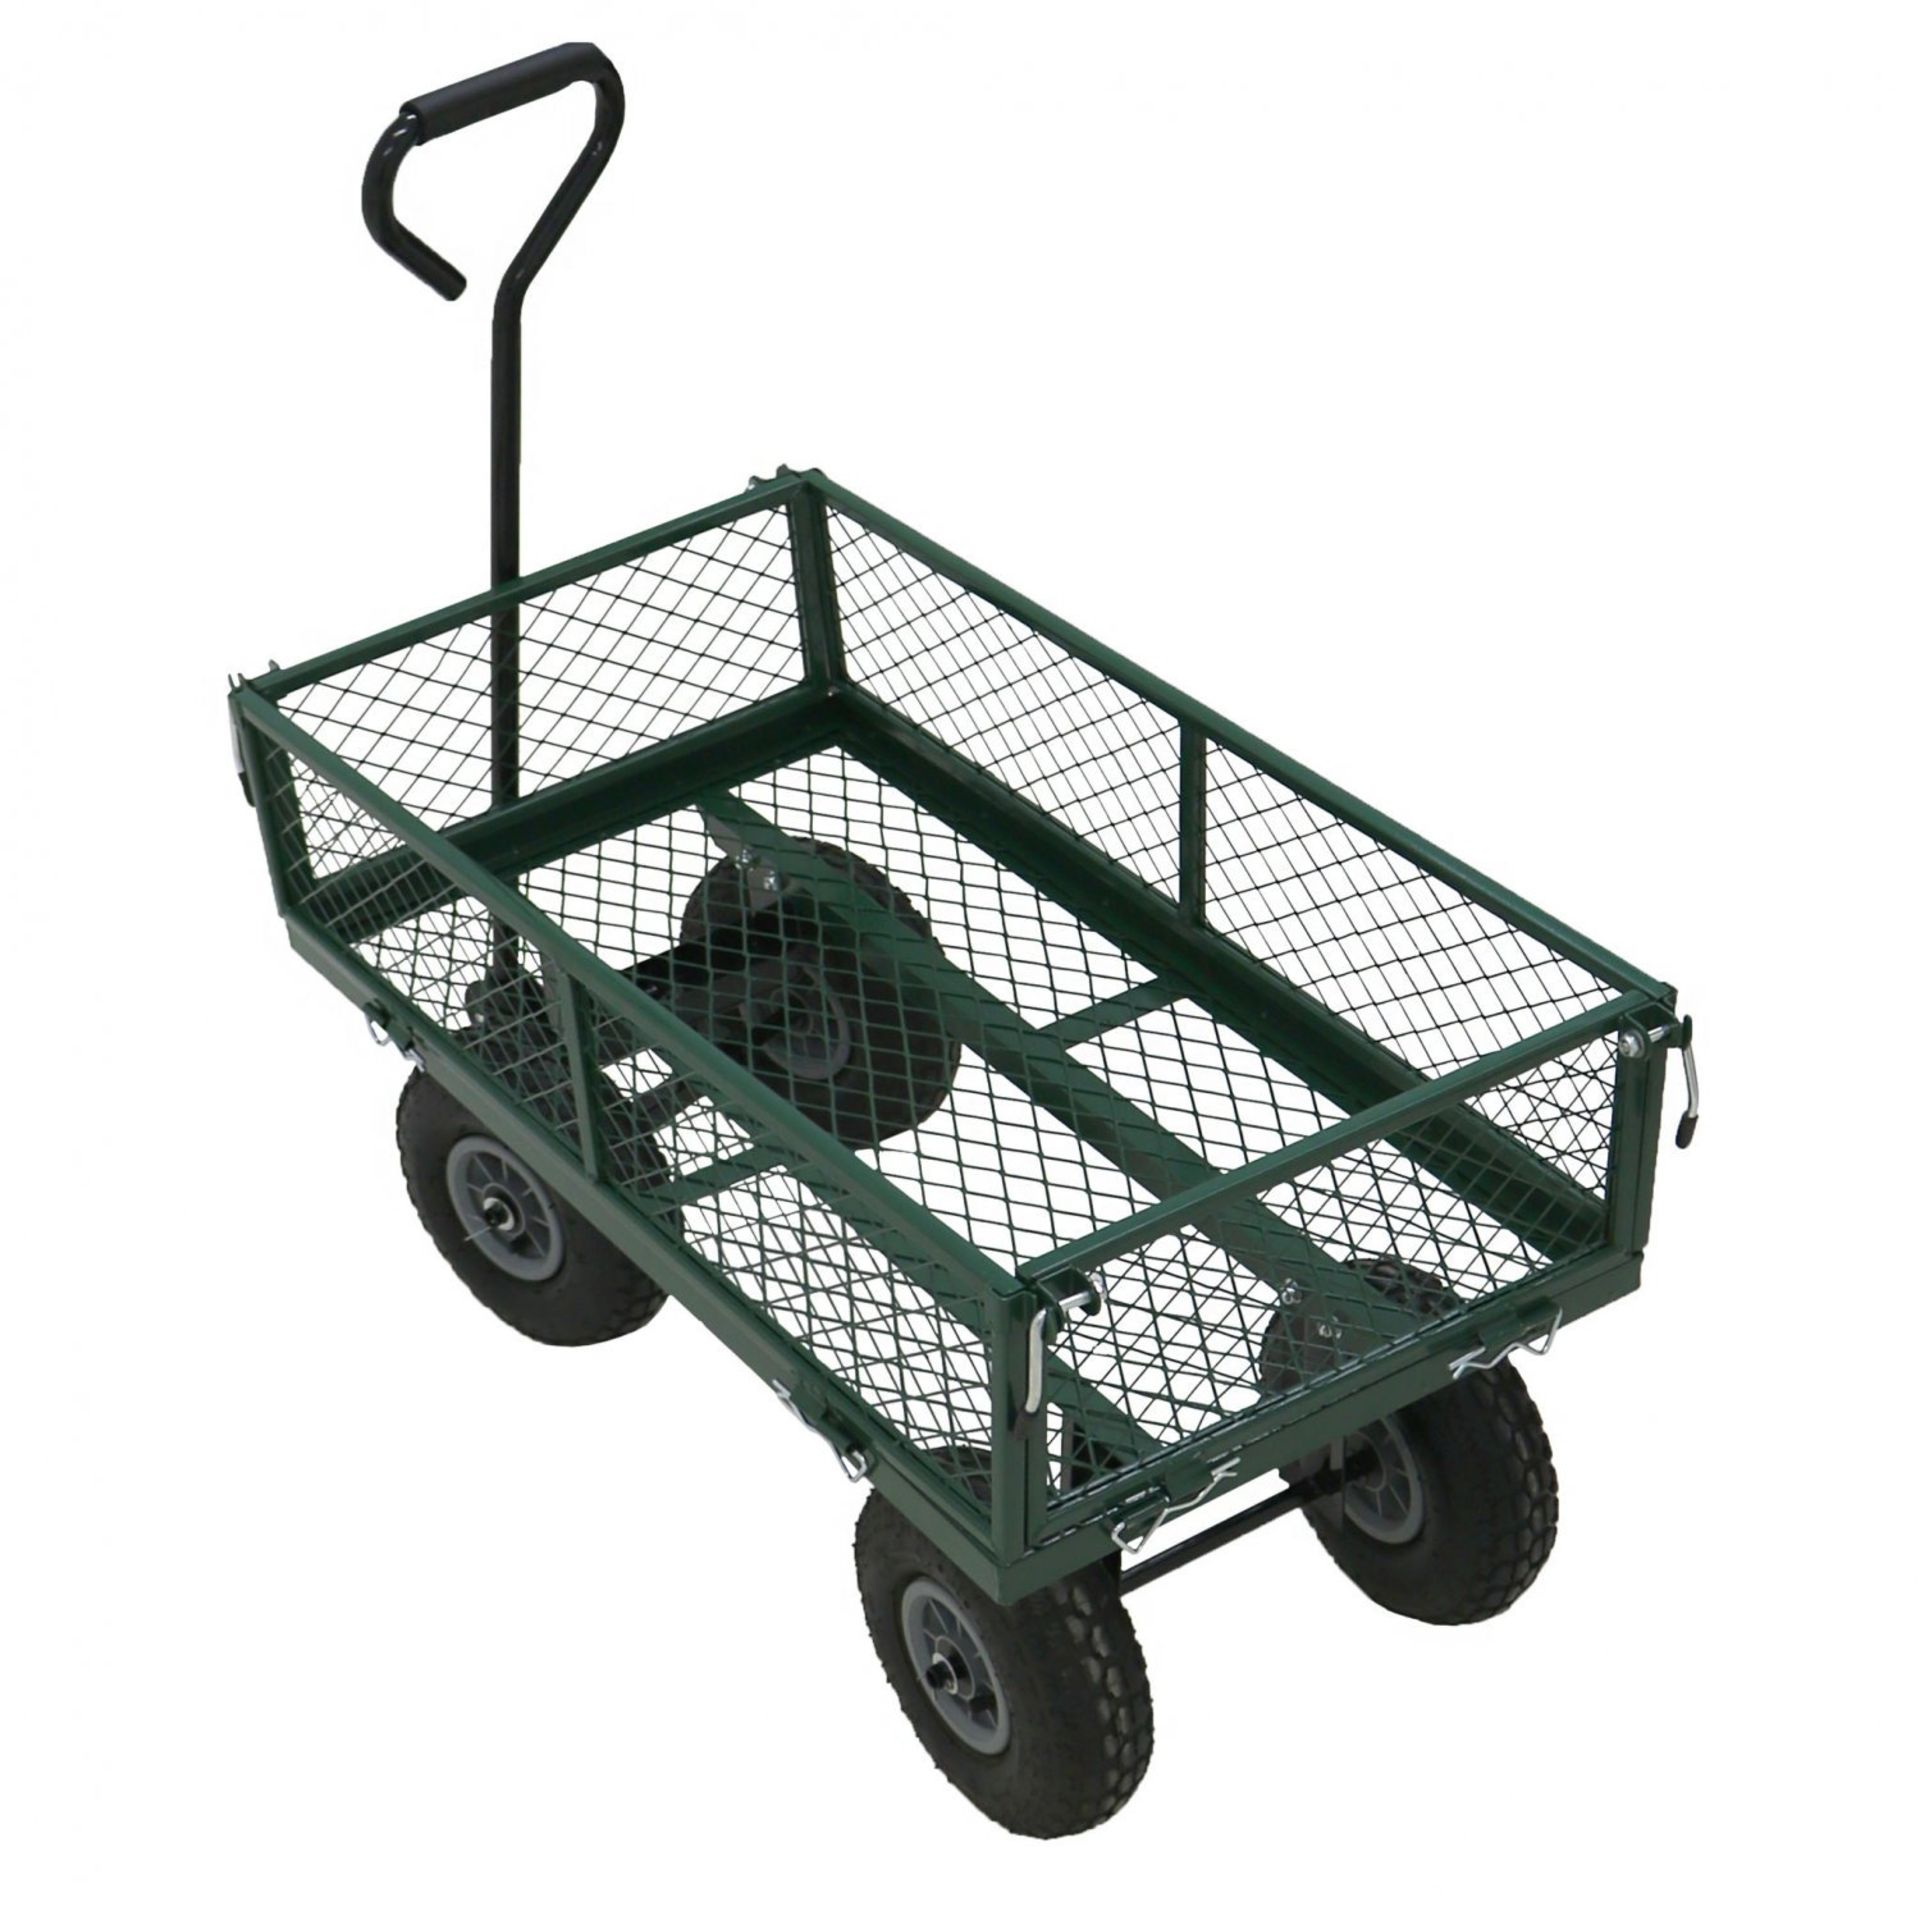 (ZP12) Heavy Duty Metal Gardening Trolley - Green Trailer Cart Our latest arrival is the gar... - Image 2 of 2